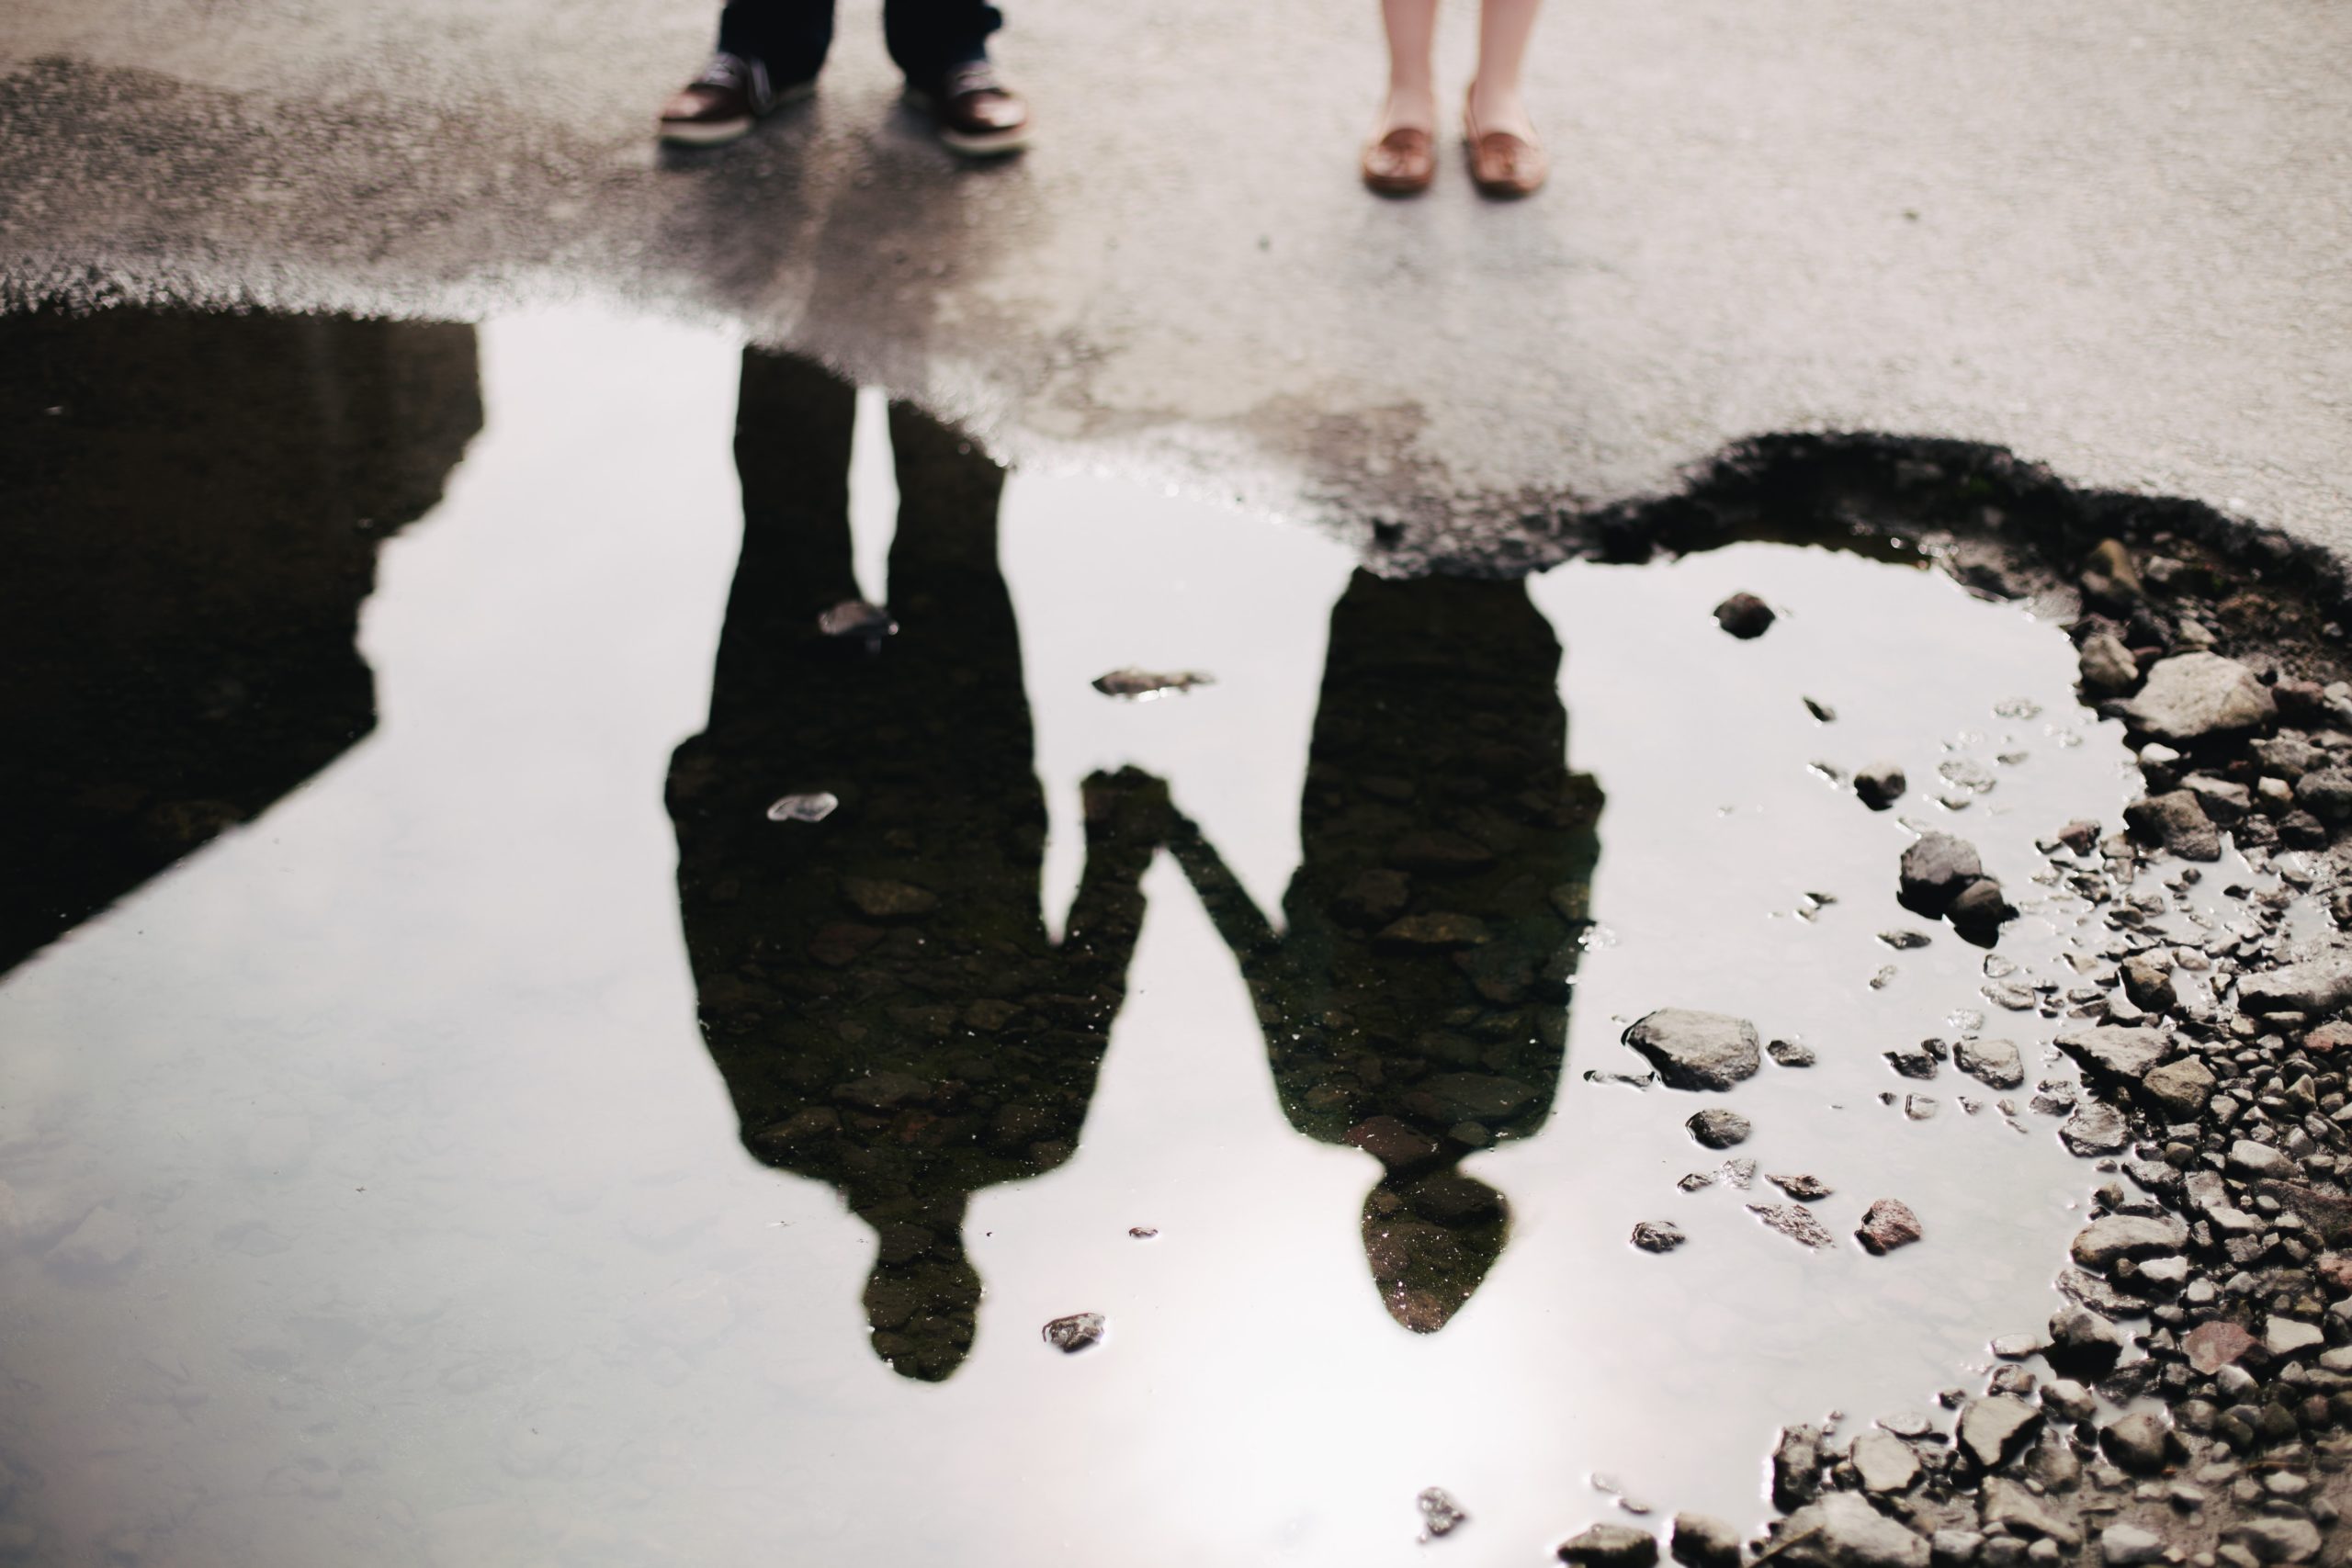 A couple standing next to each other, holding hands, reflected in a puddle.